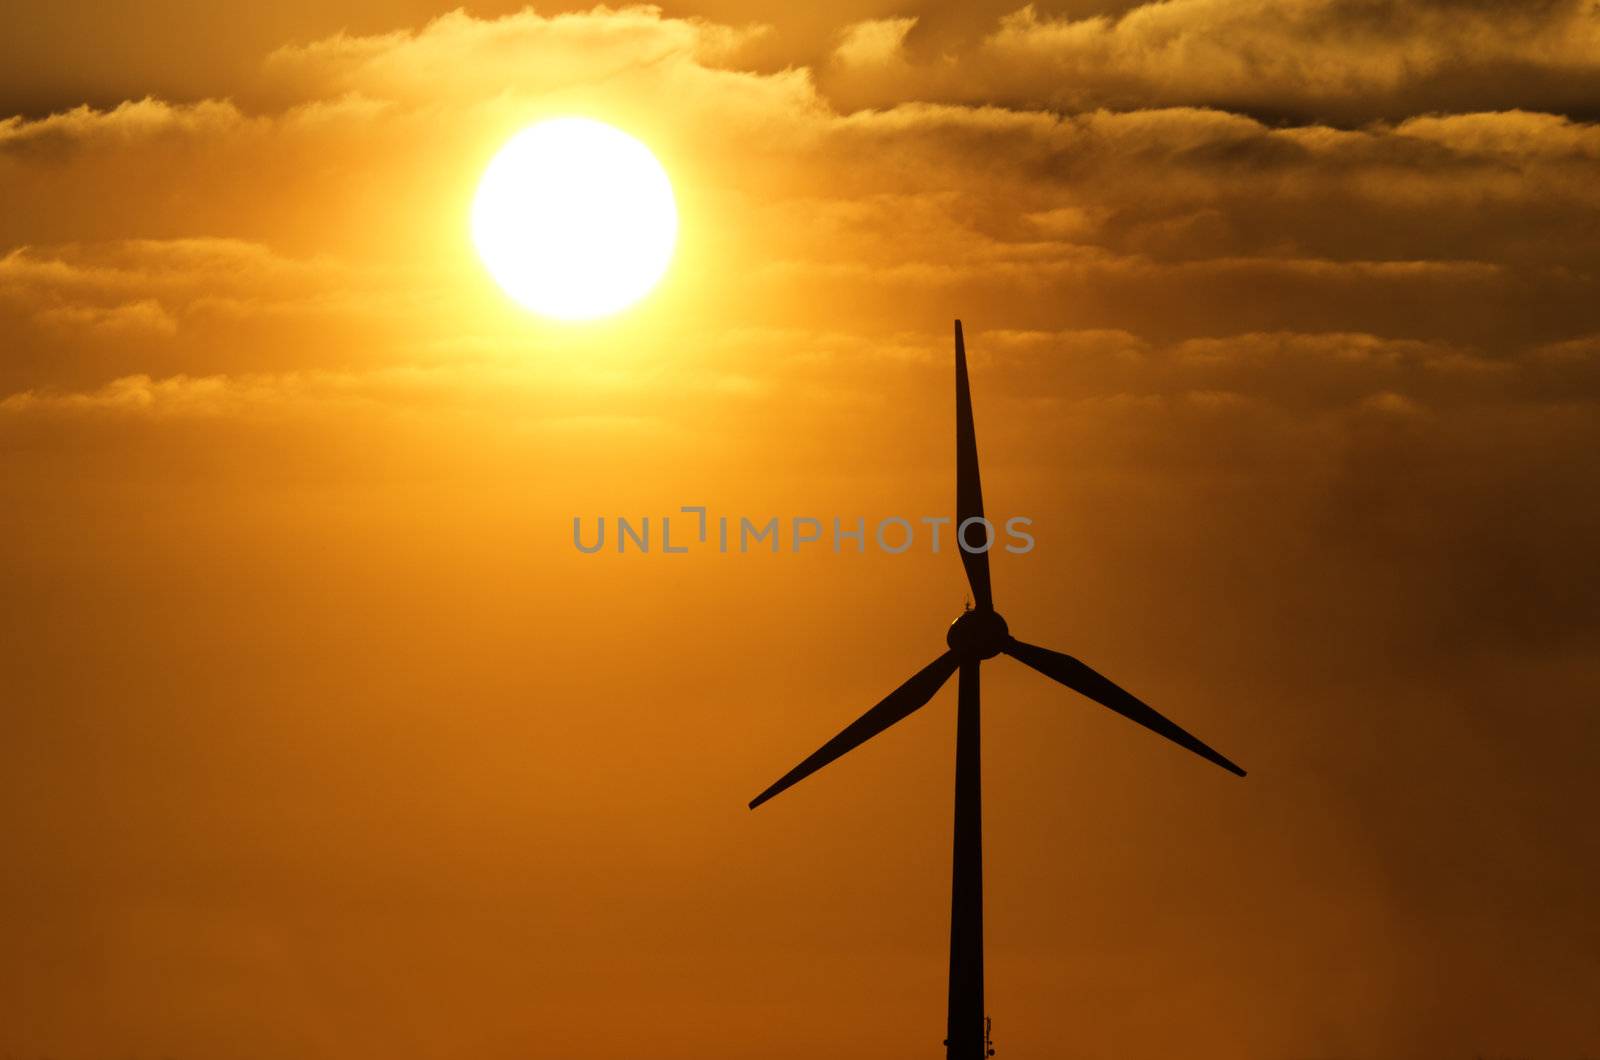 The wind and the sun are the most important sources of regenerative energy. The light of the setting sun gives the picture an agreeable warmth.